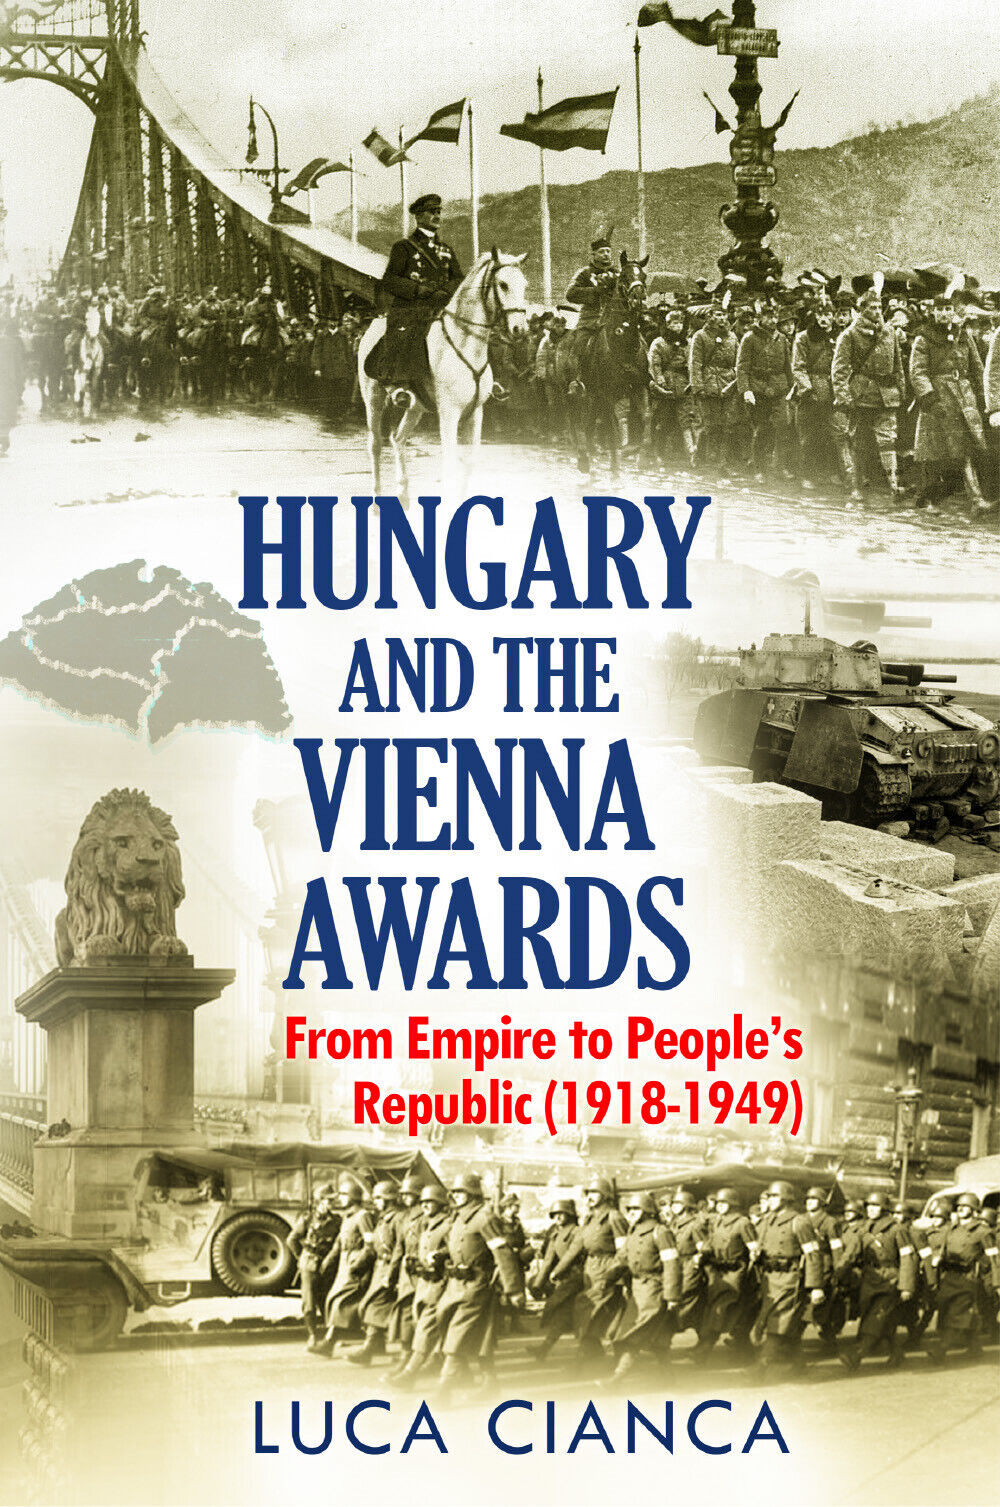 HUNGARY AND THE VIENNA AWARDS. From Empire to People?s Republic (1918-1949) di L